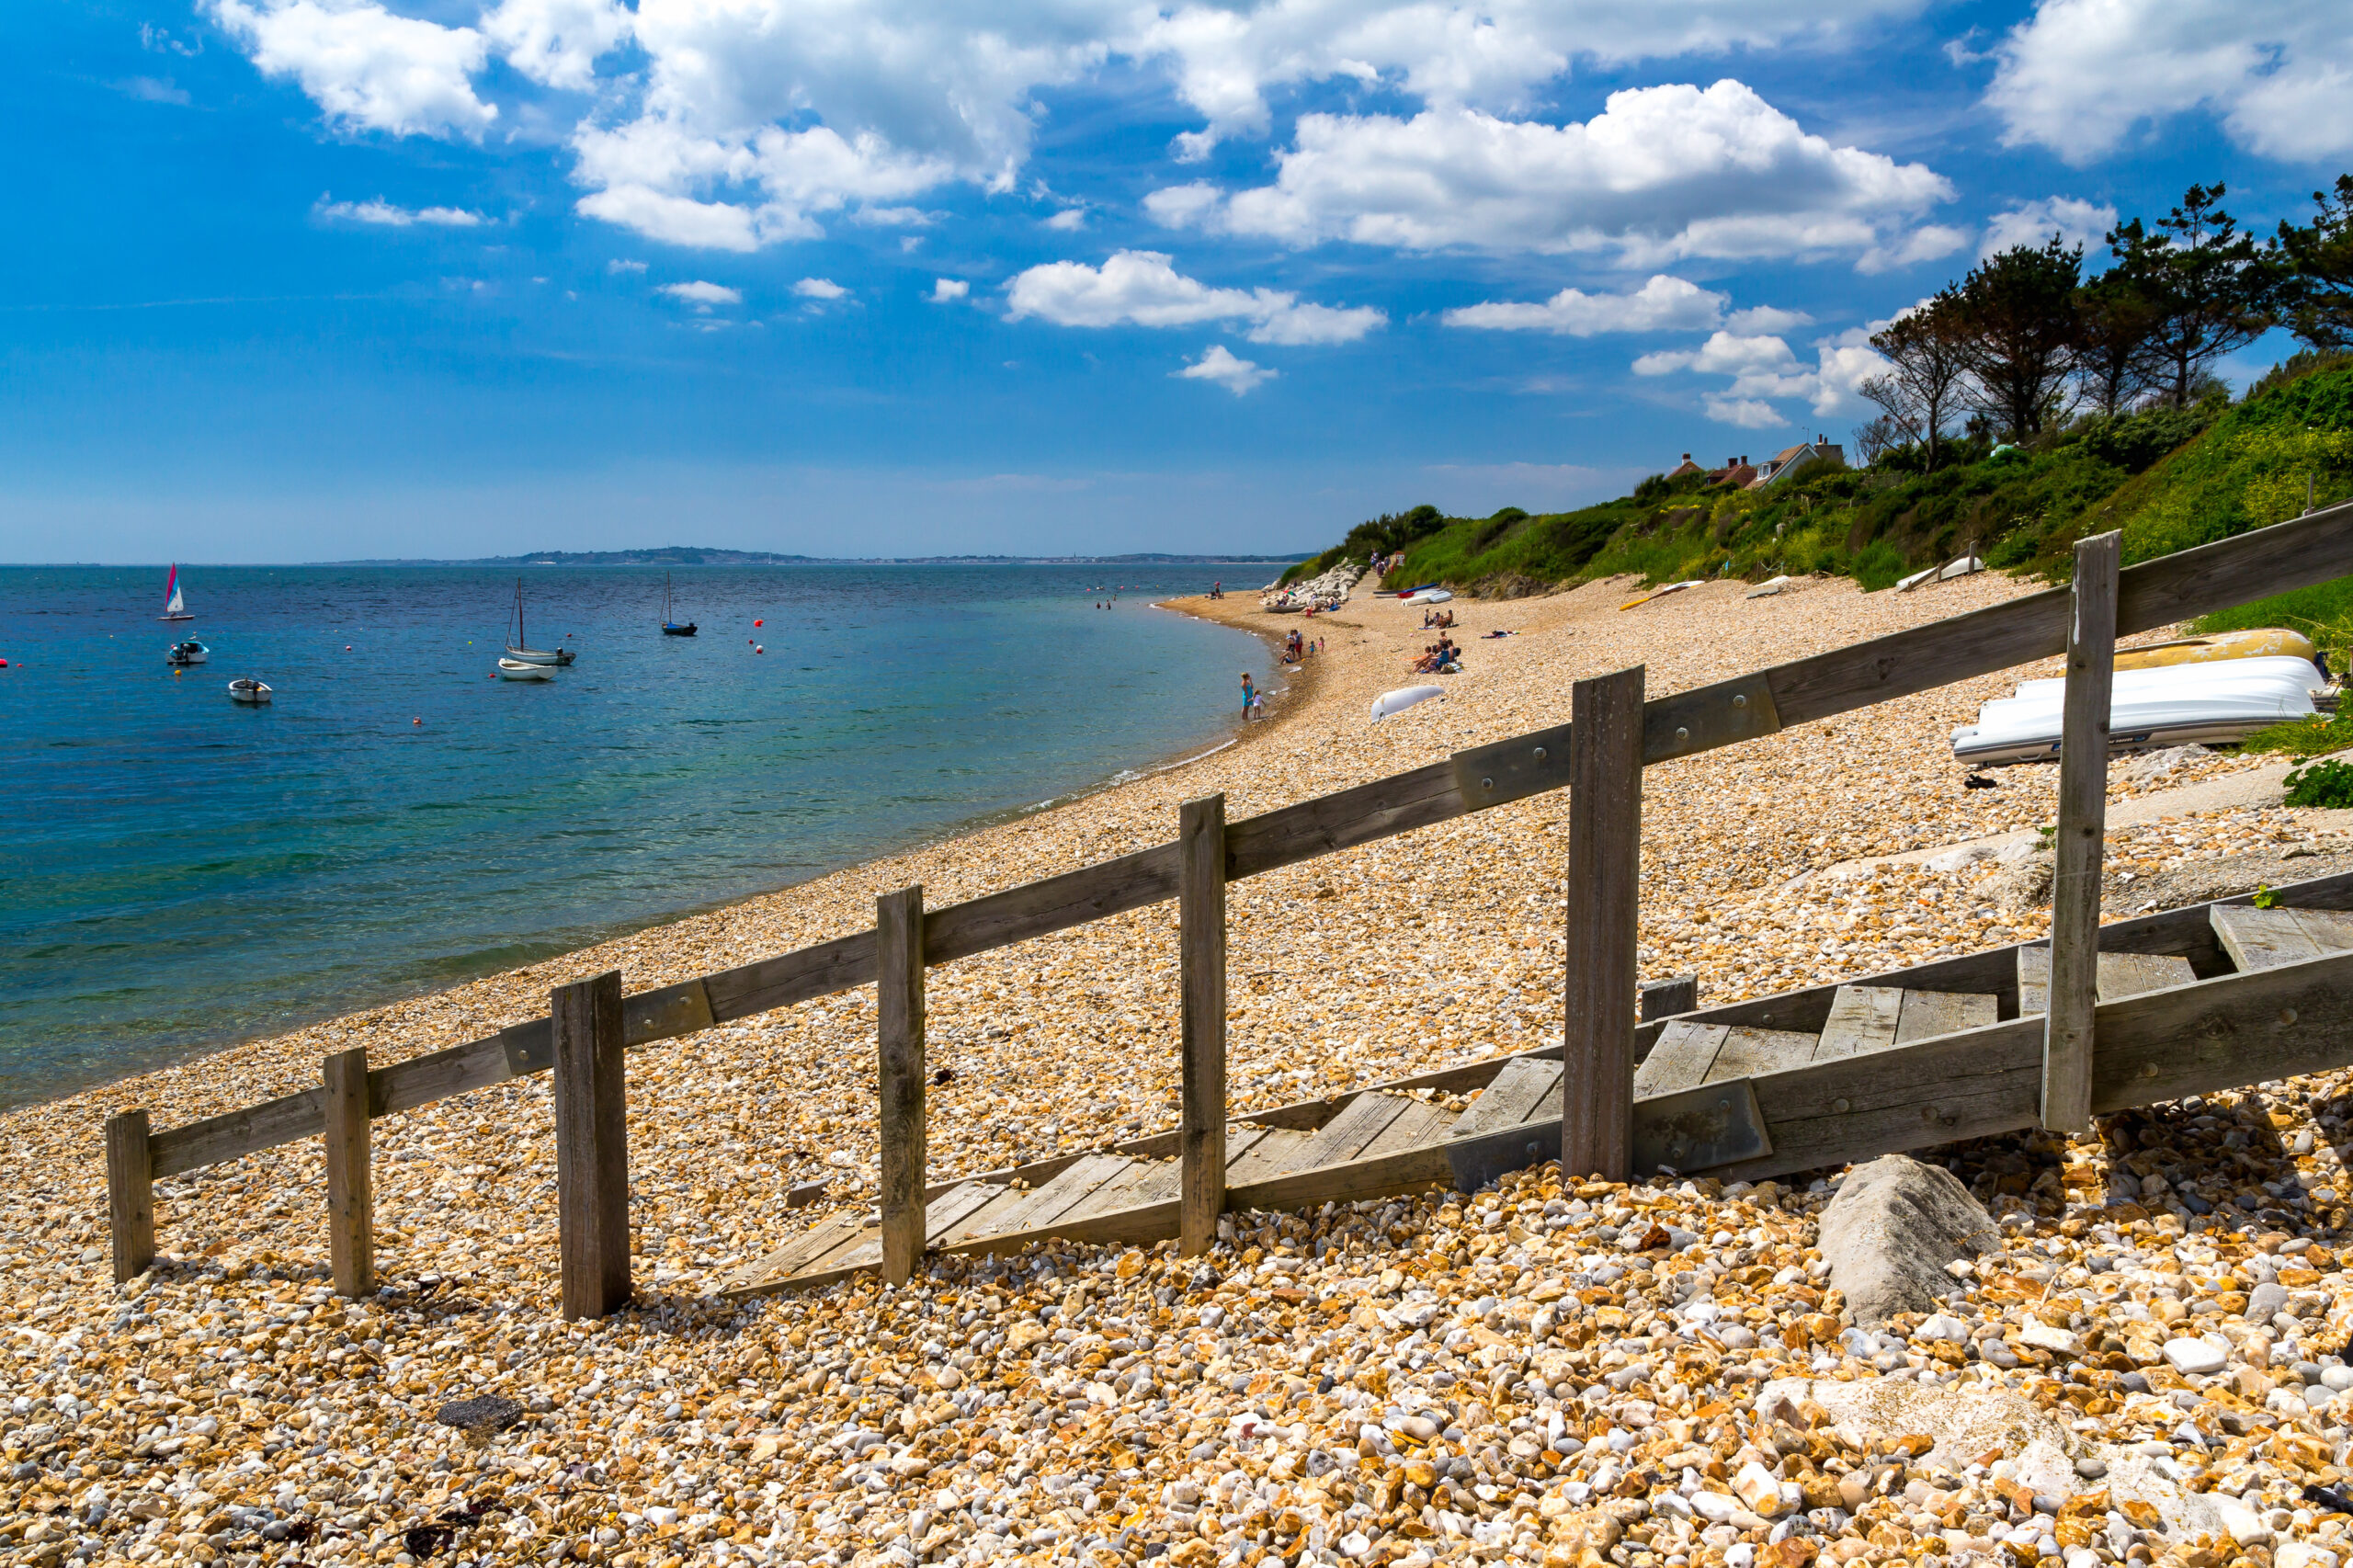 Ringstead Bay - beaches in Dorset